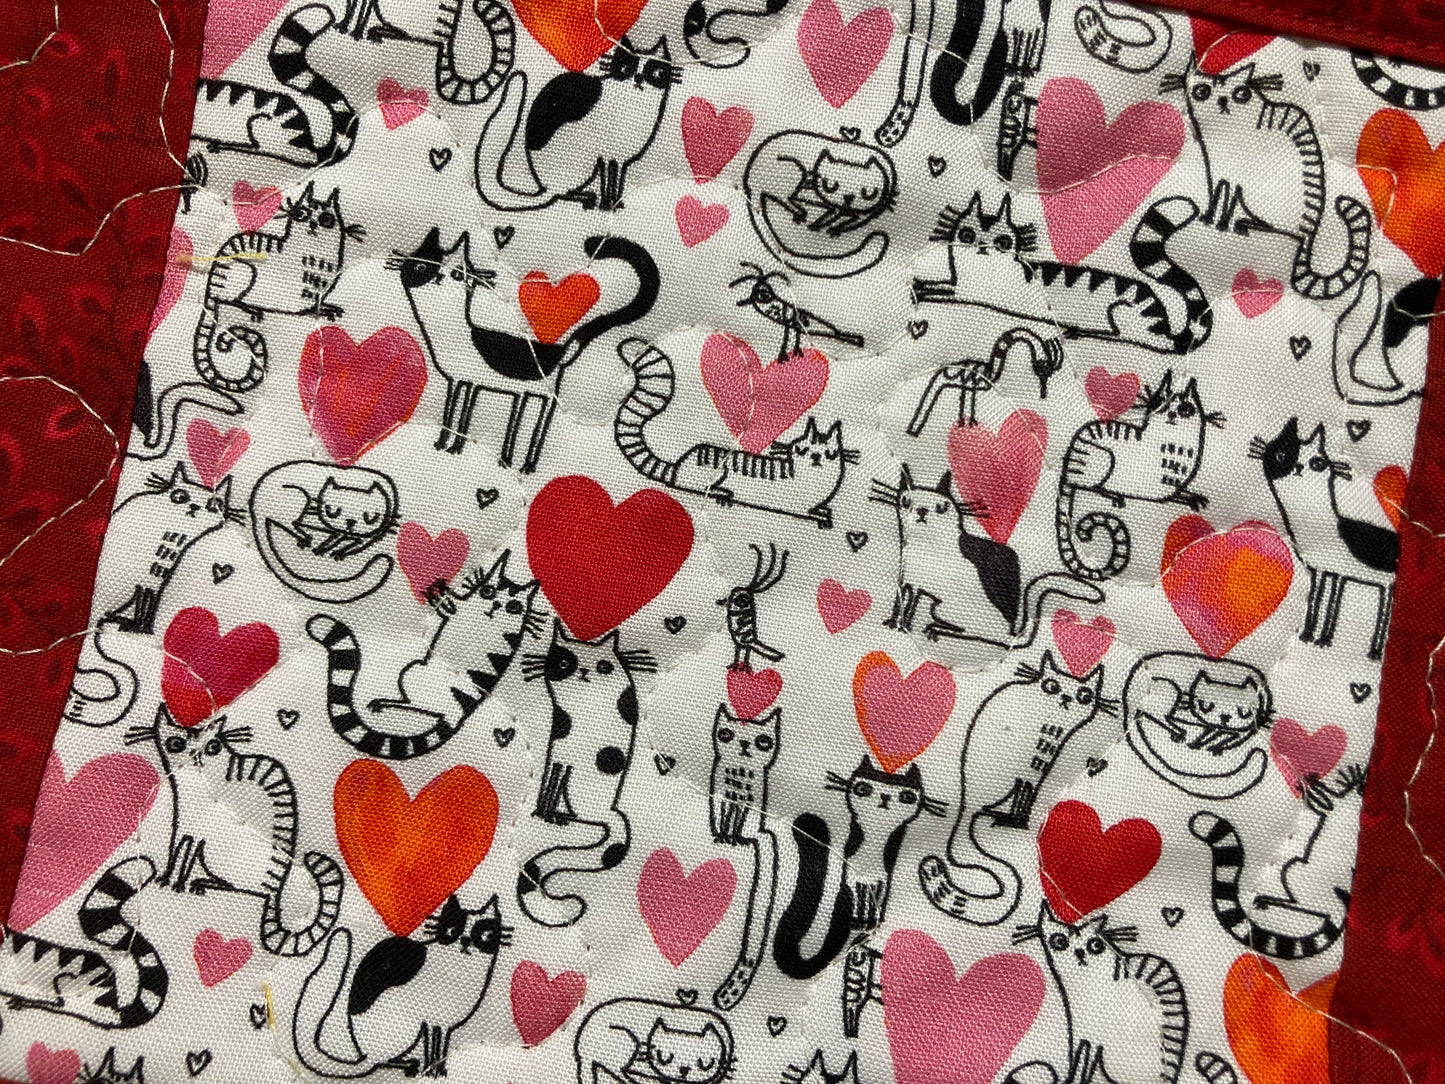 Sassy Cats Fabric Quilted Mug Rugs Snack Table Mats, 6x12" Set of Two(2), Valentine Hearts Cat Lover Feline Whimsical Quirky Fun  Handmade